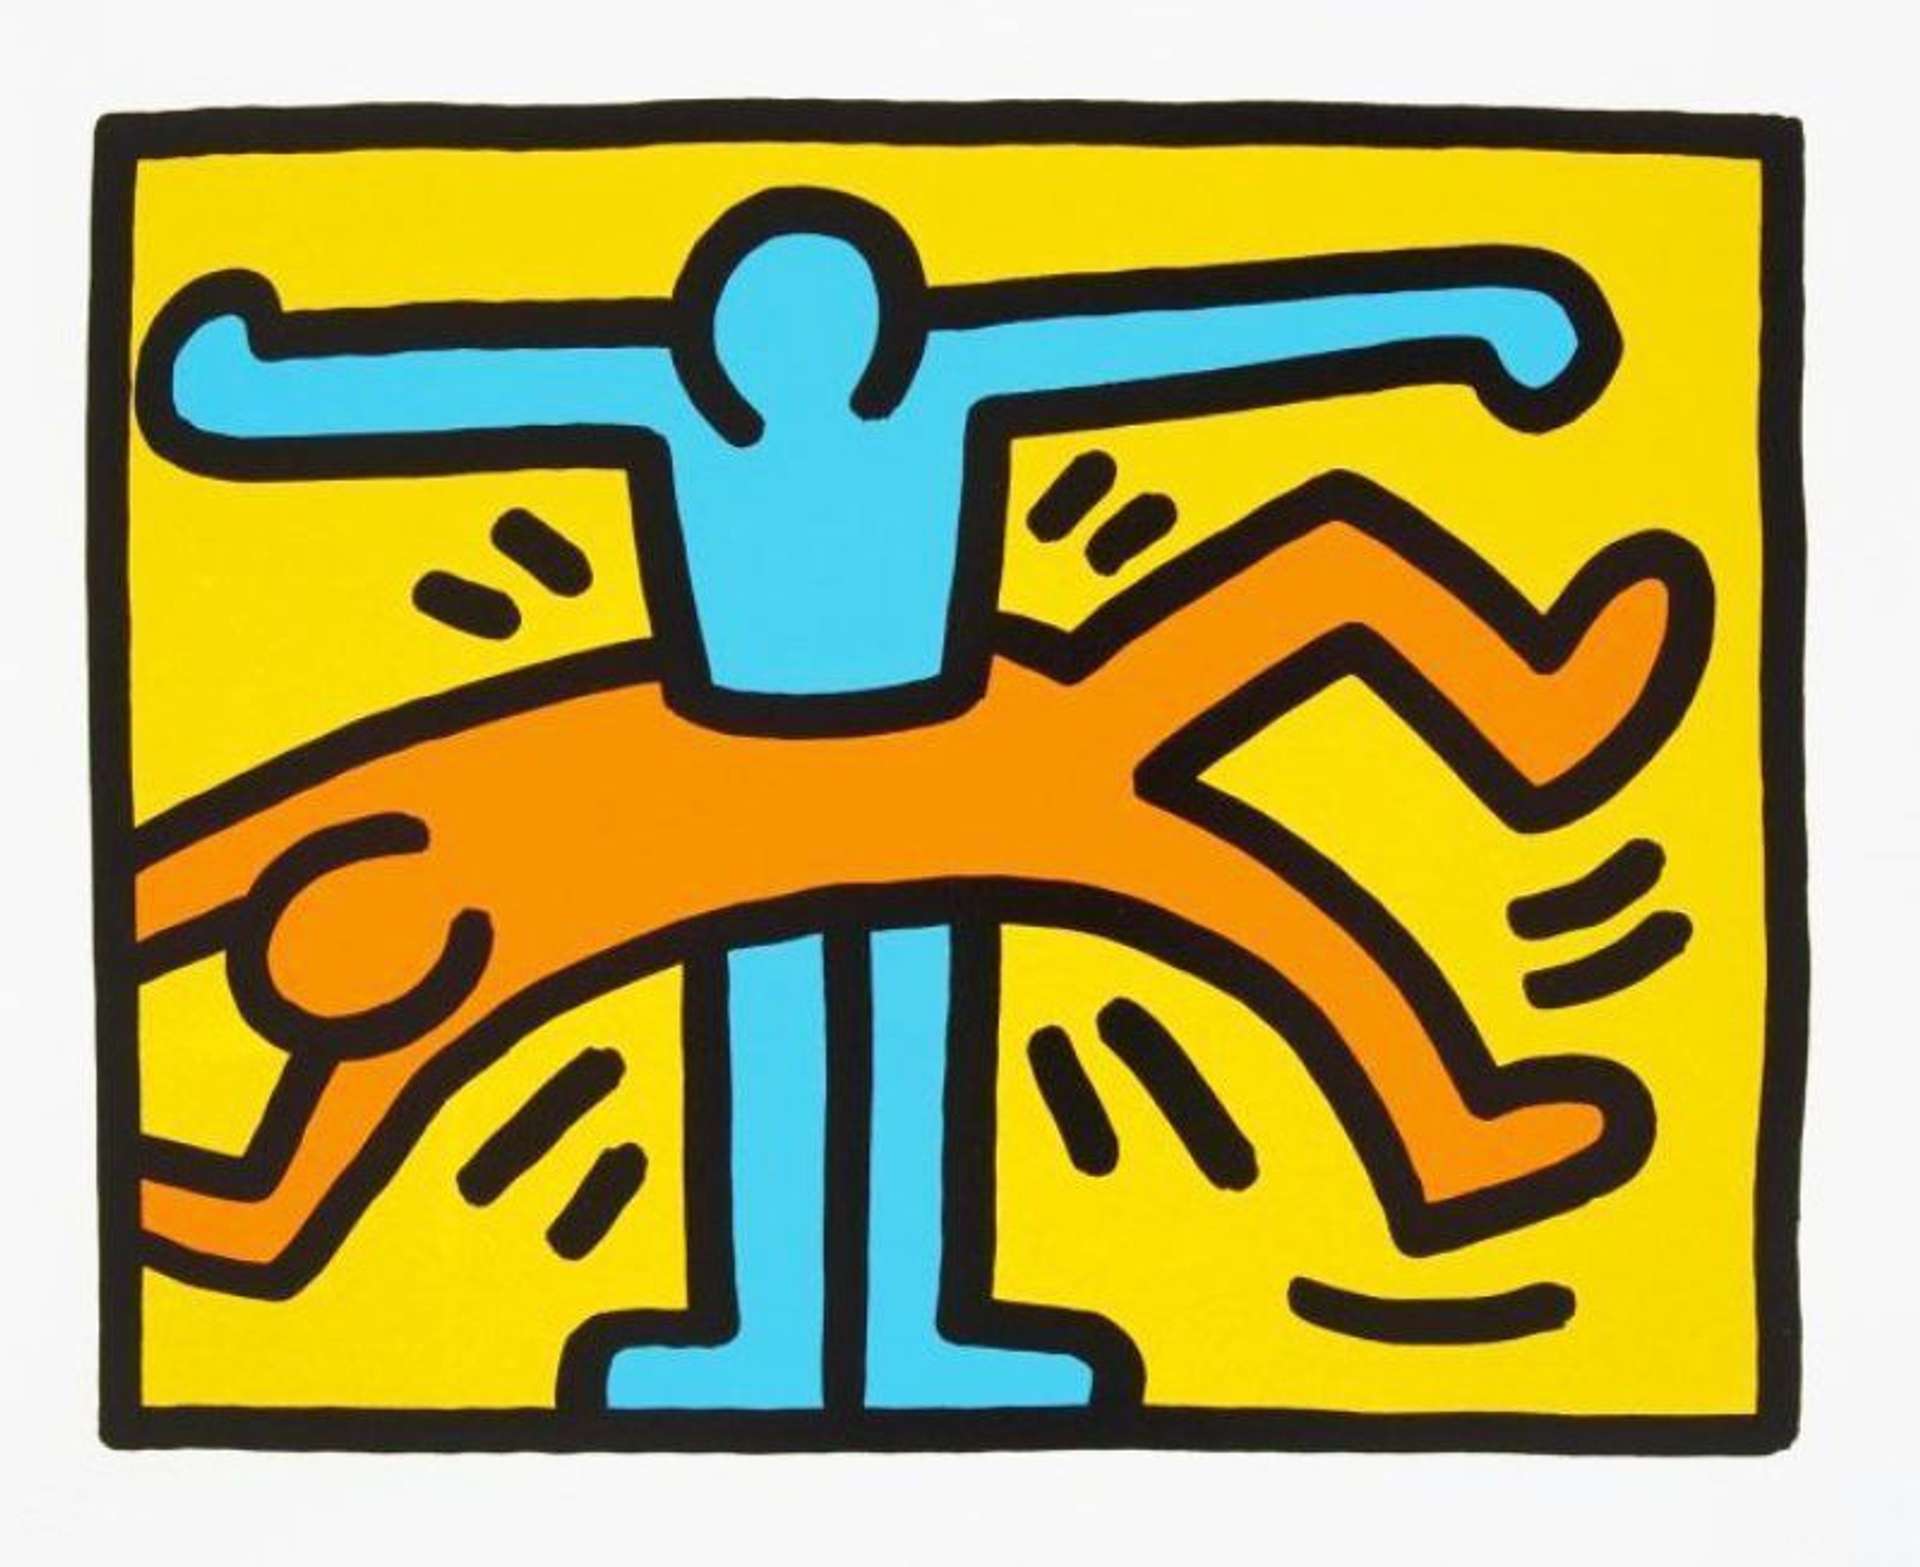 Pop Shop VI, Plate III by Keith Haring